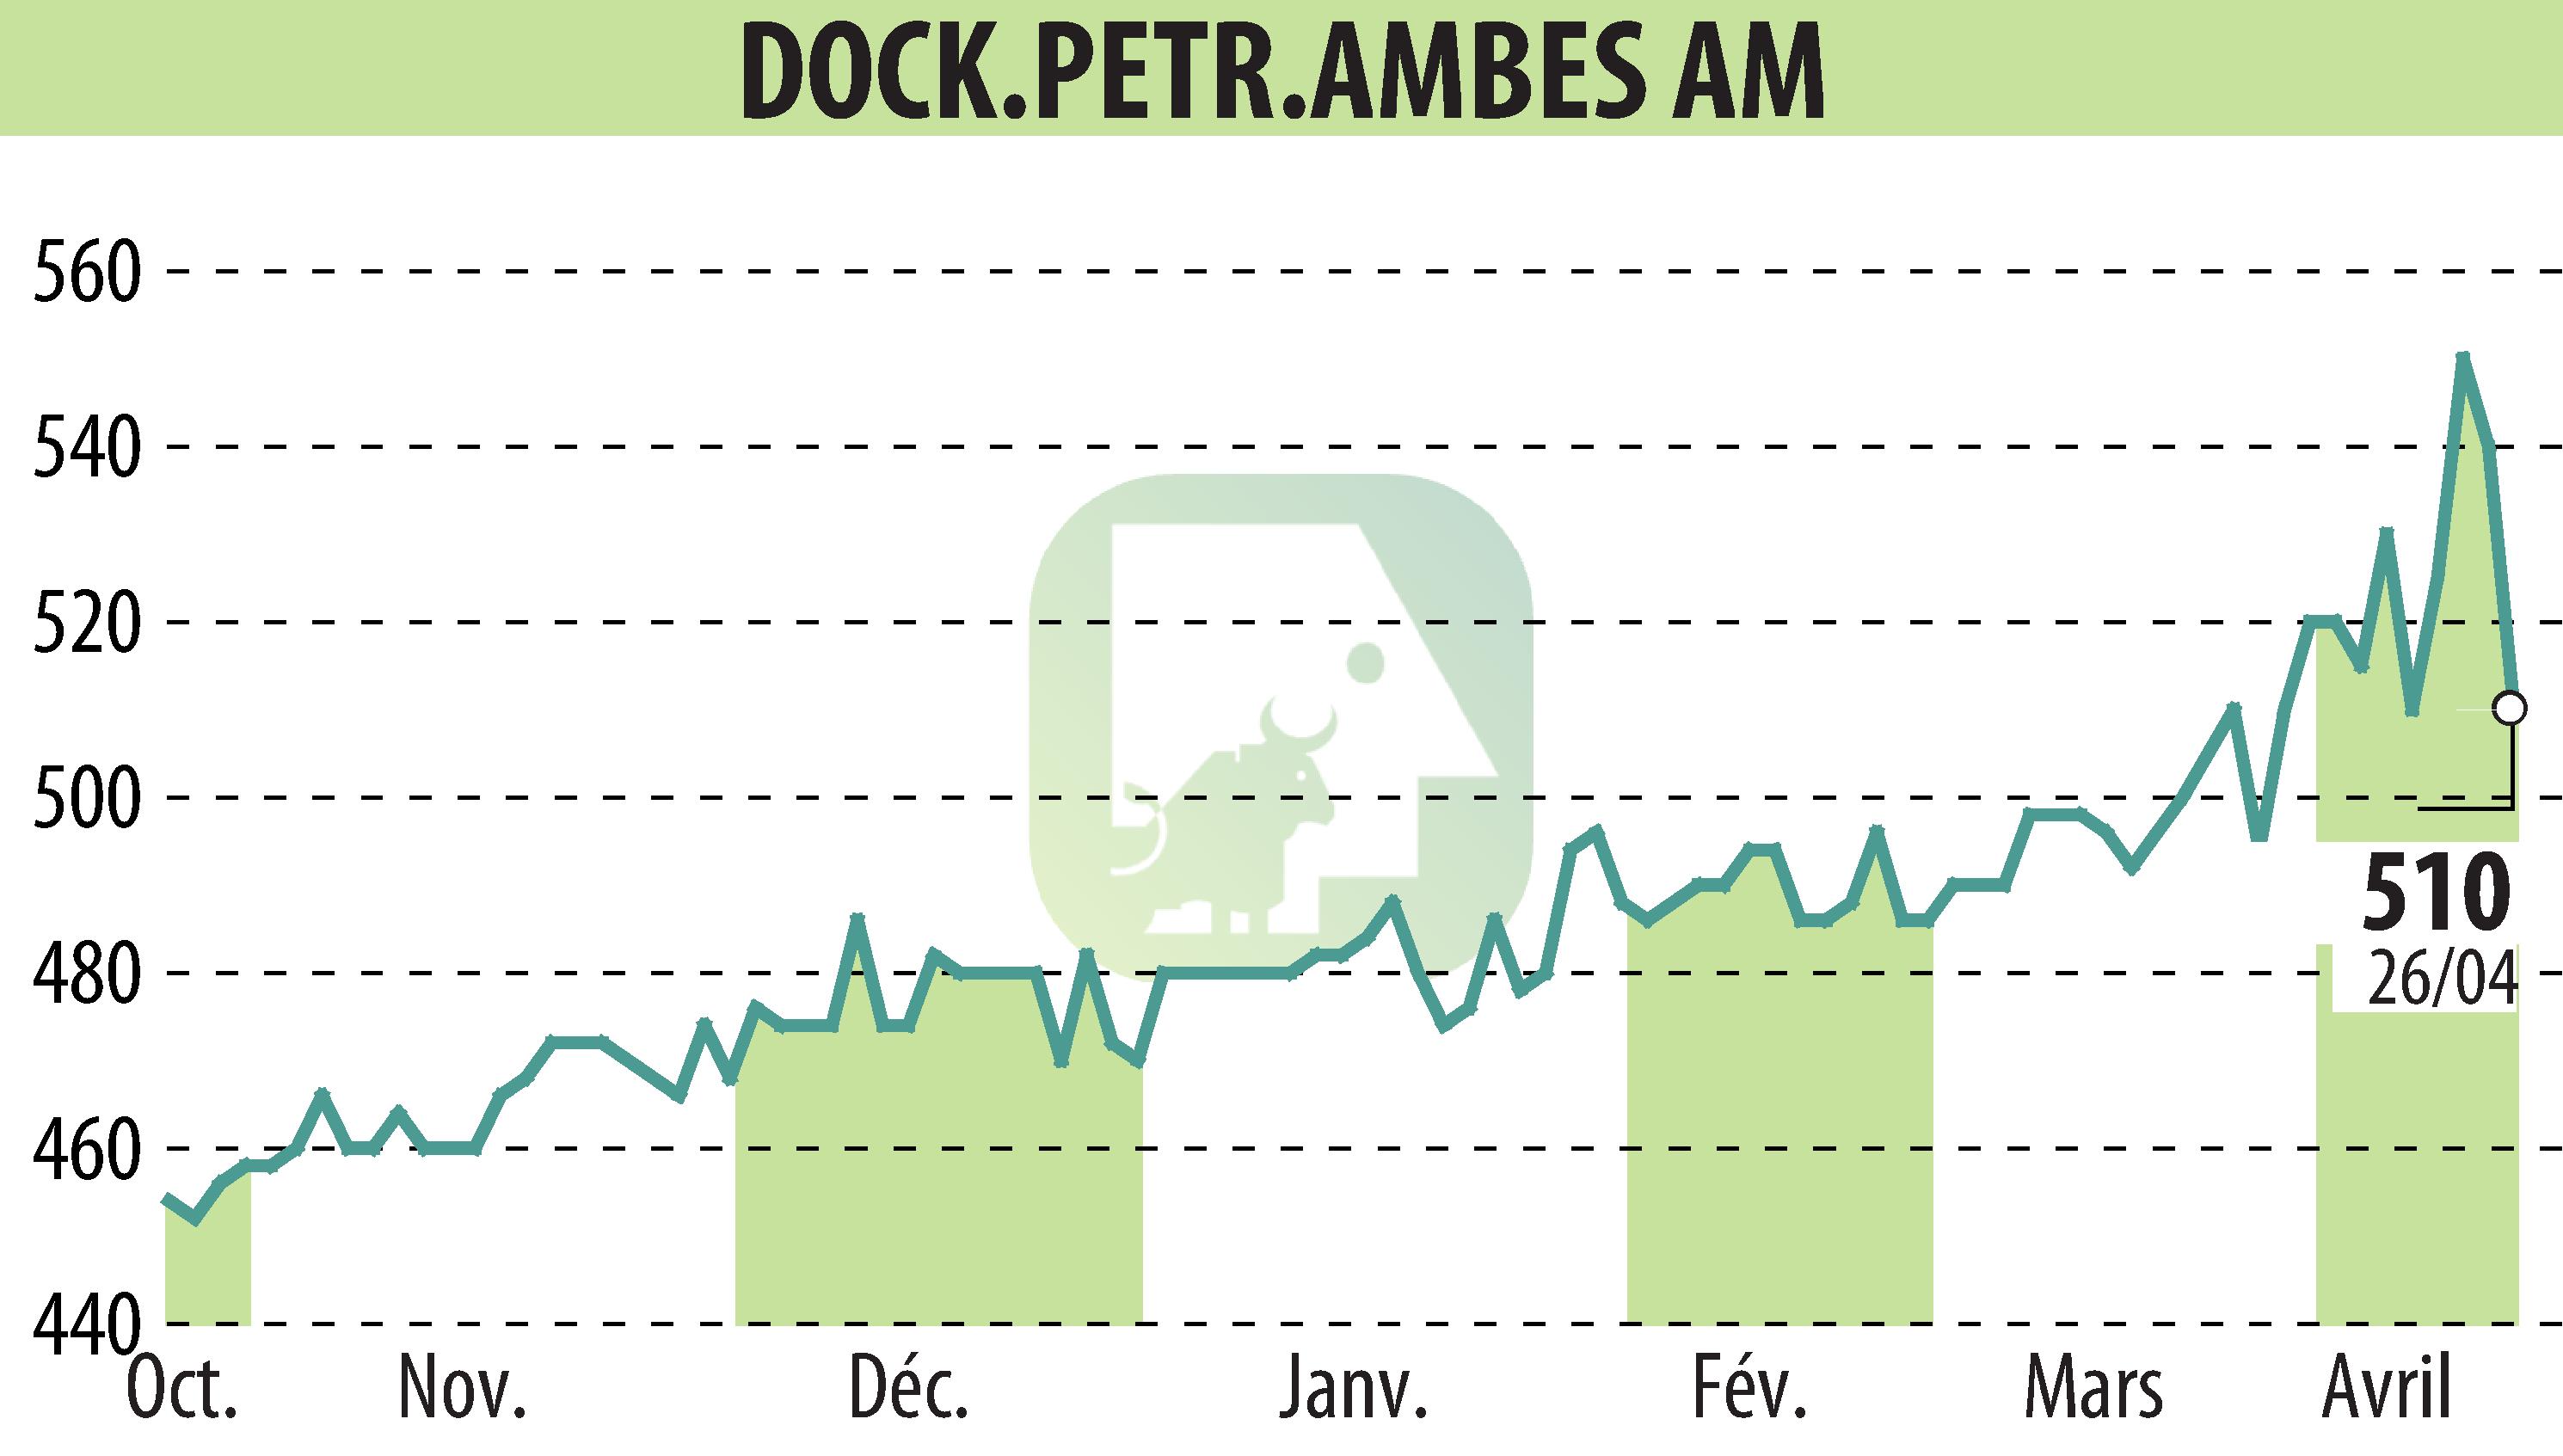 Stock price chart of DOCKS PETROLES D'AMBES (EPA:DPAM) showing fluctuations.